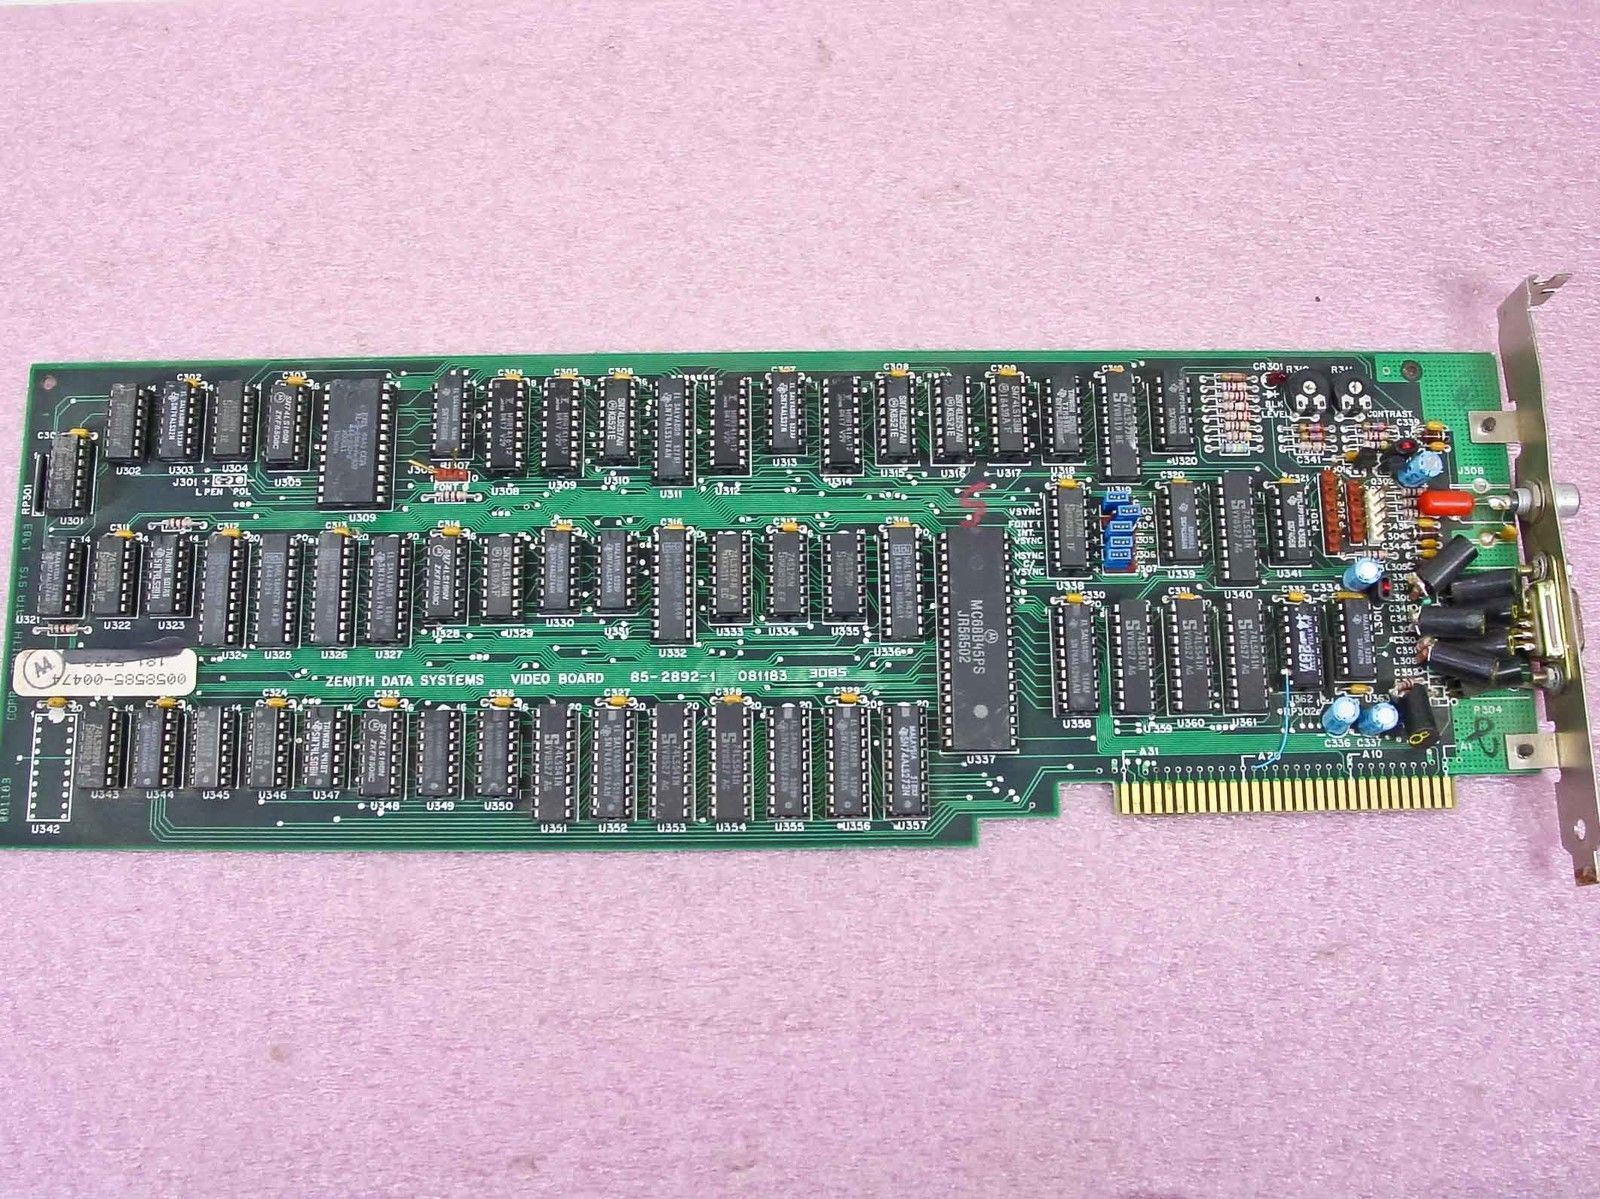 Zenith 85-2892-1 8-Bit ISA Video Card VINTAGE 1983 - 081183 - As-Is / For Parts